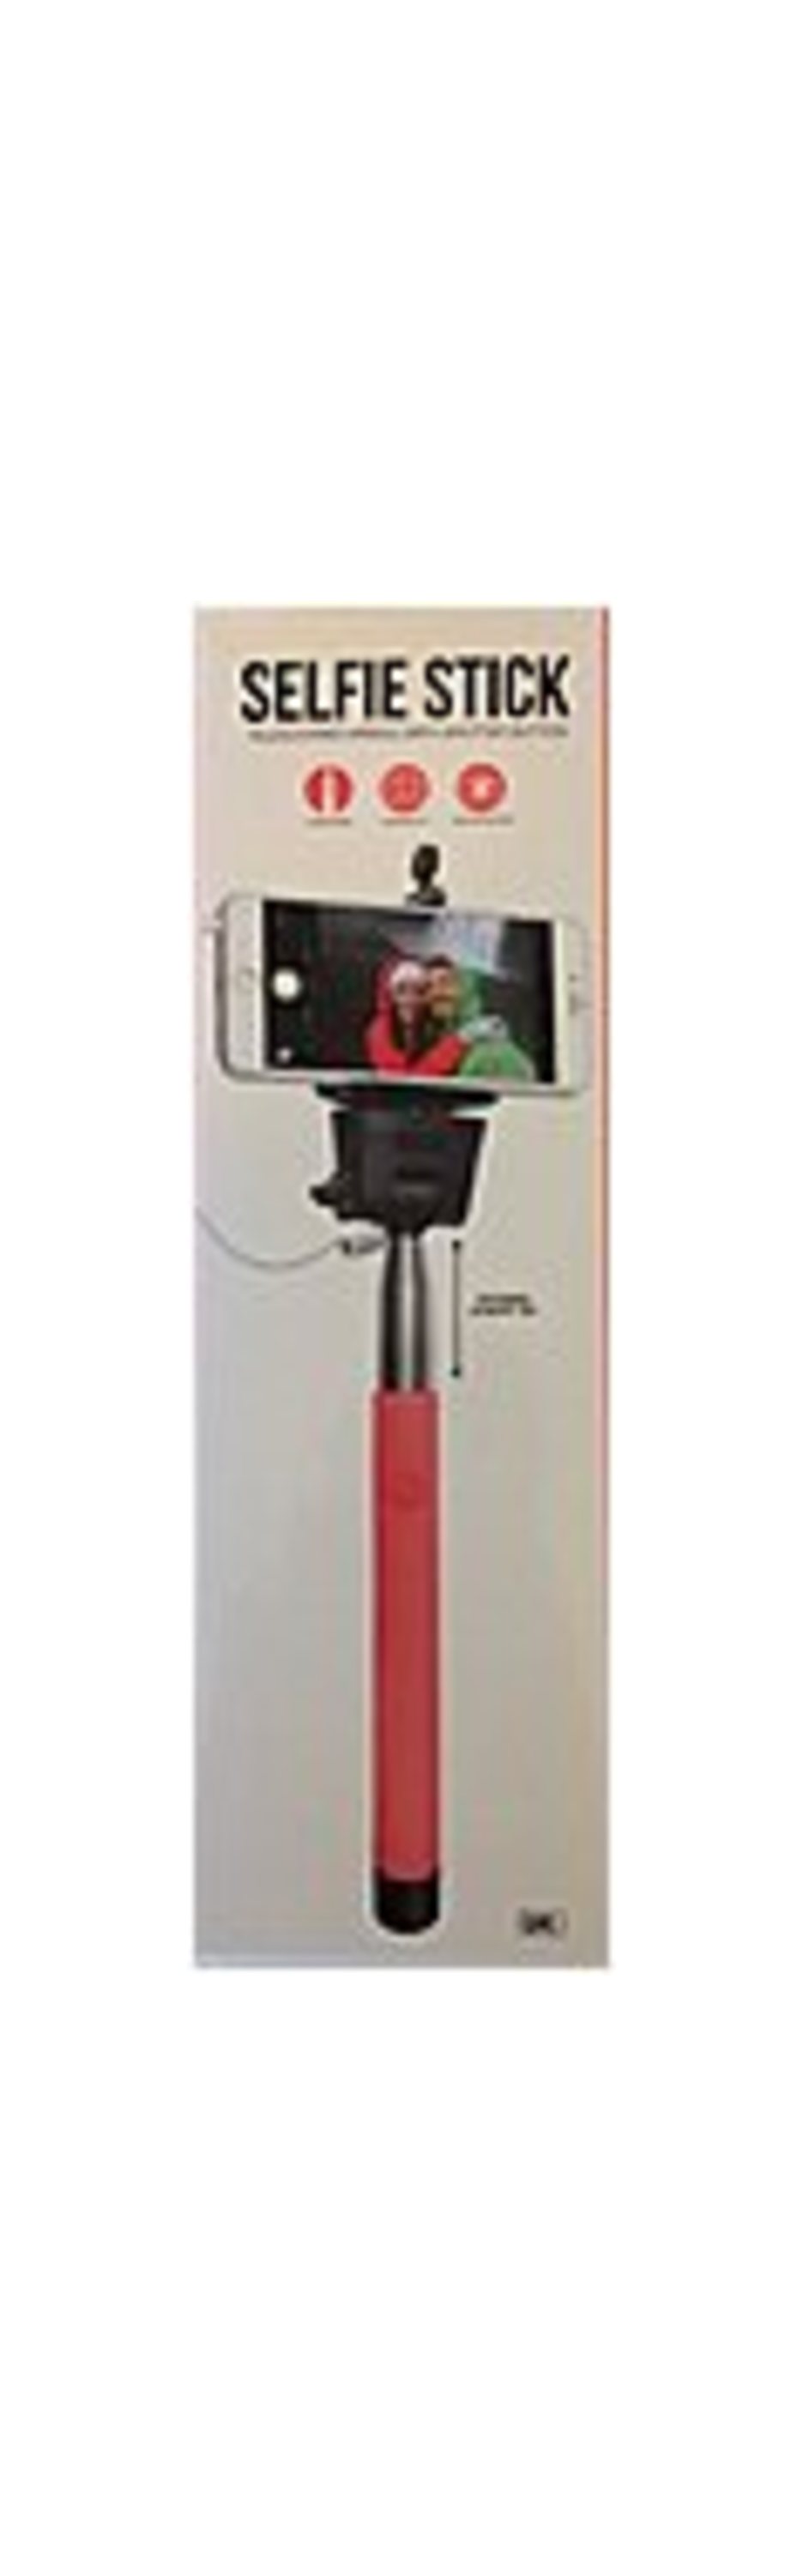 Gems 813125024499 Selfie Stick With Telescoping Handle - Coral